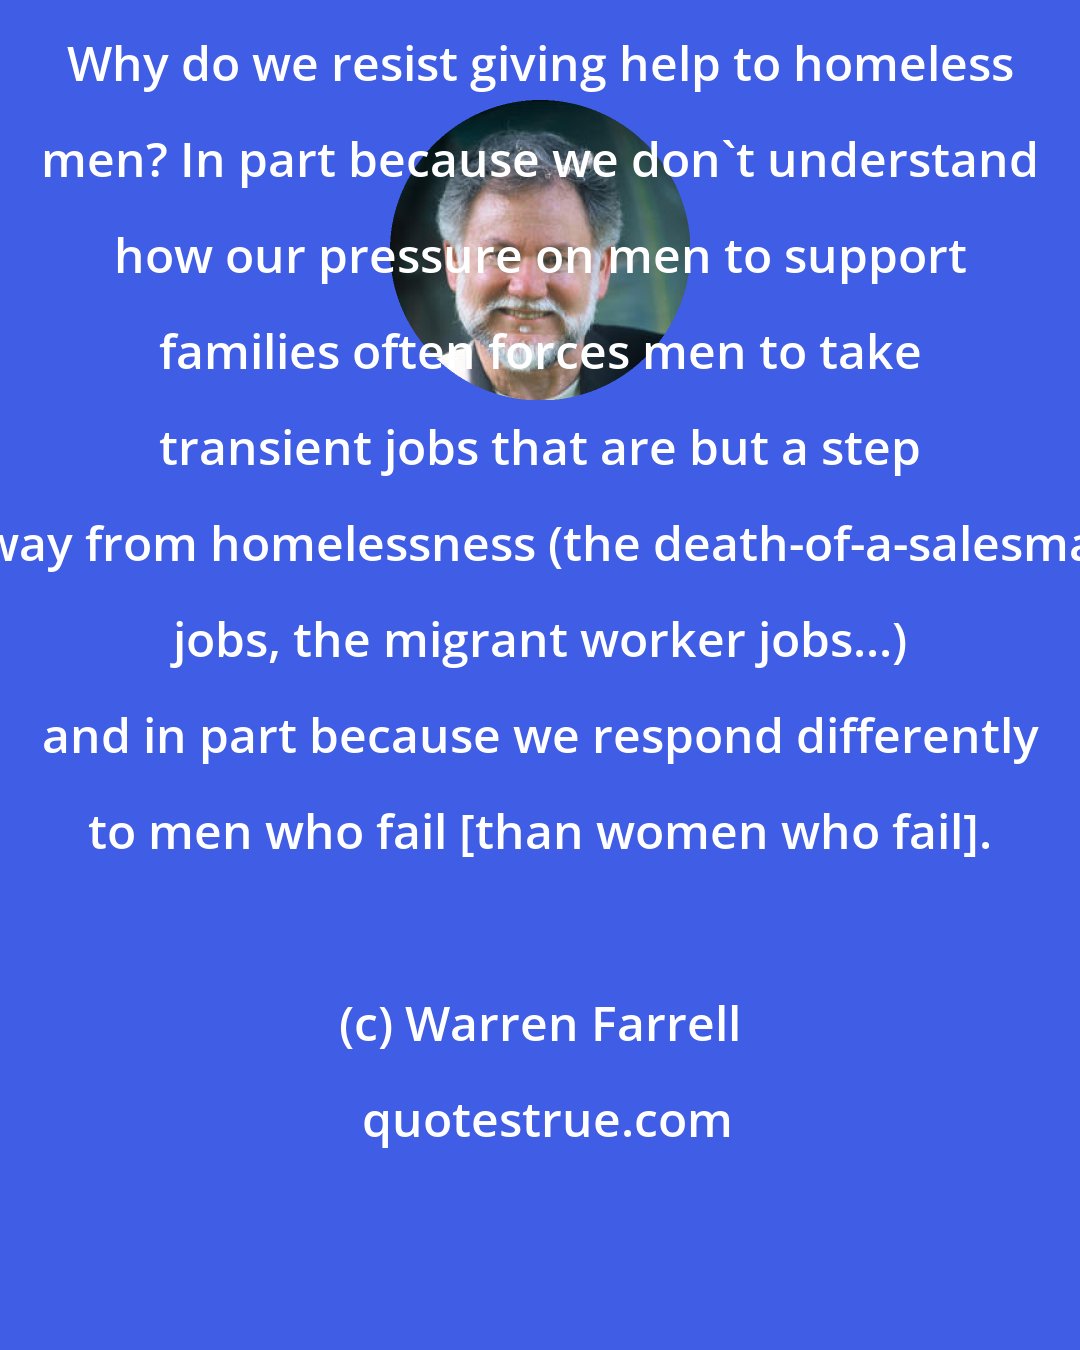 Warren Farrell: Why do we resist giving help to homeless men? In part because we don't understand how our pressure on men to support families often forces men to take transient jobs that are but a step away from homelessness (the death-of-a-salesman jobs, the migrant worker jobs...) and in part because we respond differently to men who fail [than women who fail].